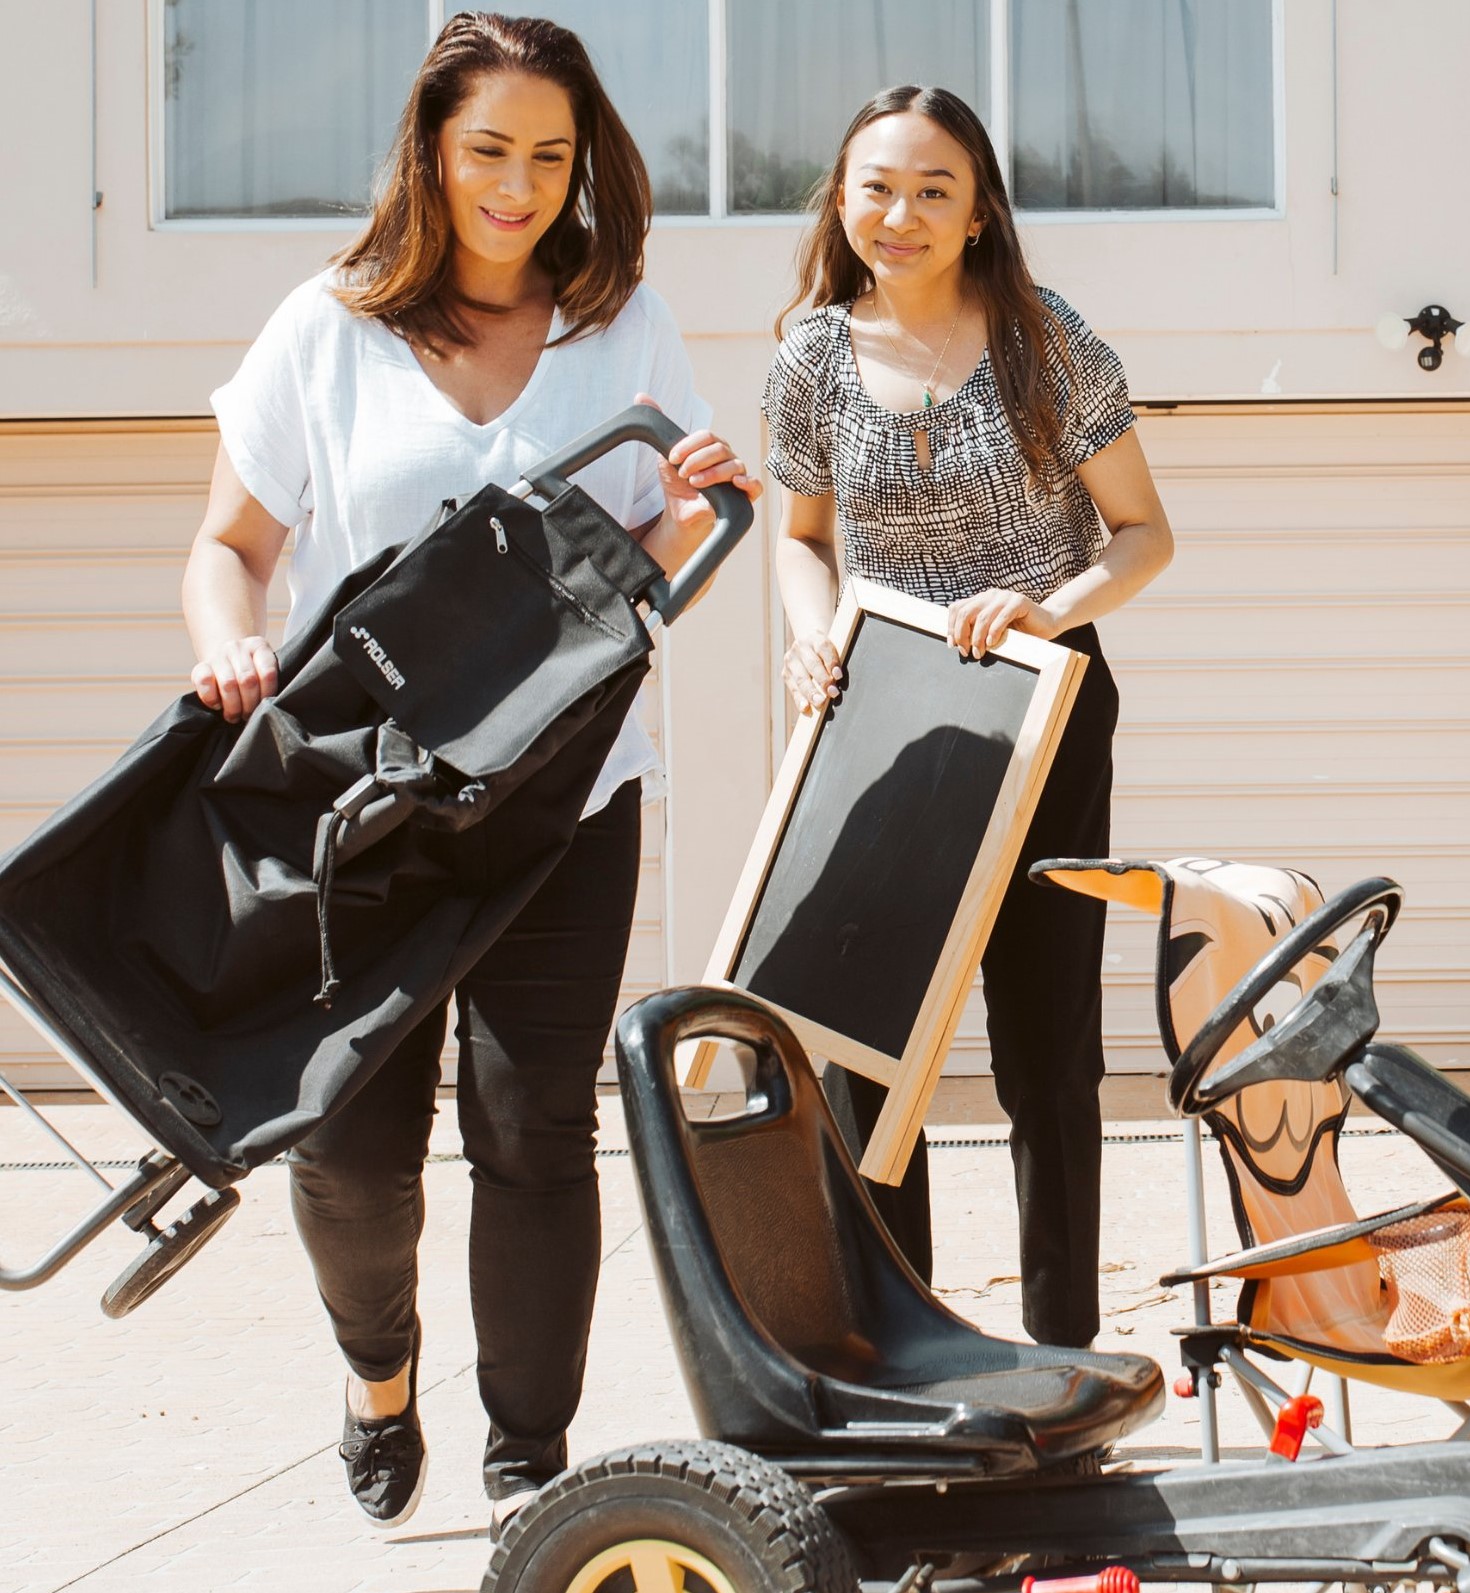 Bulky waste pick-up for all Canberra suburbs this year